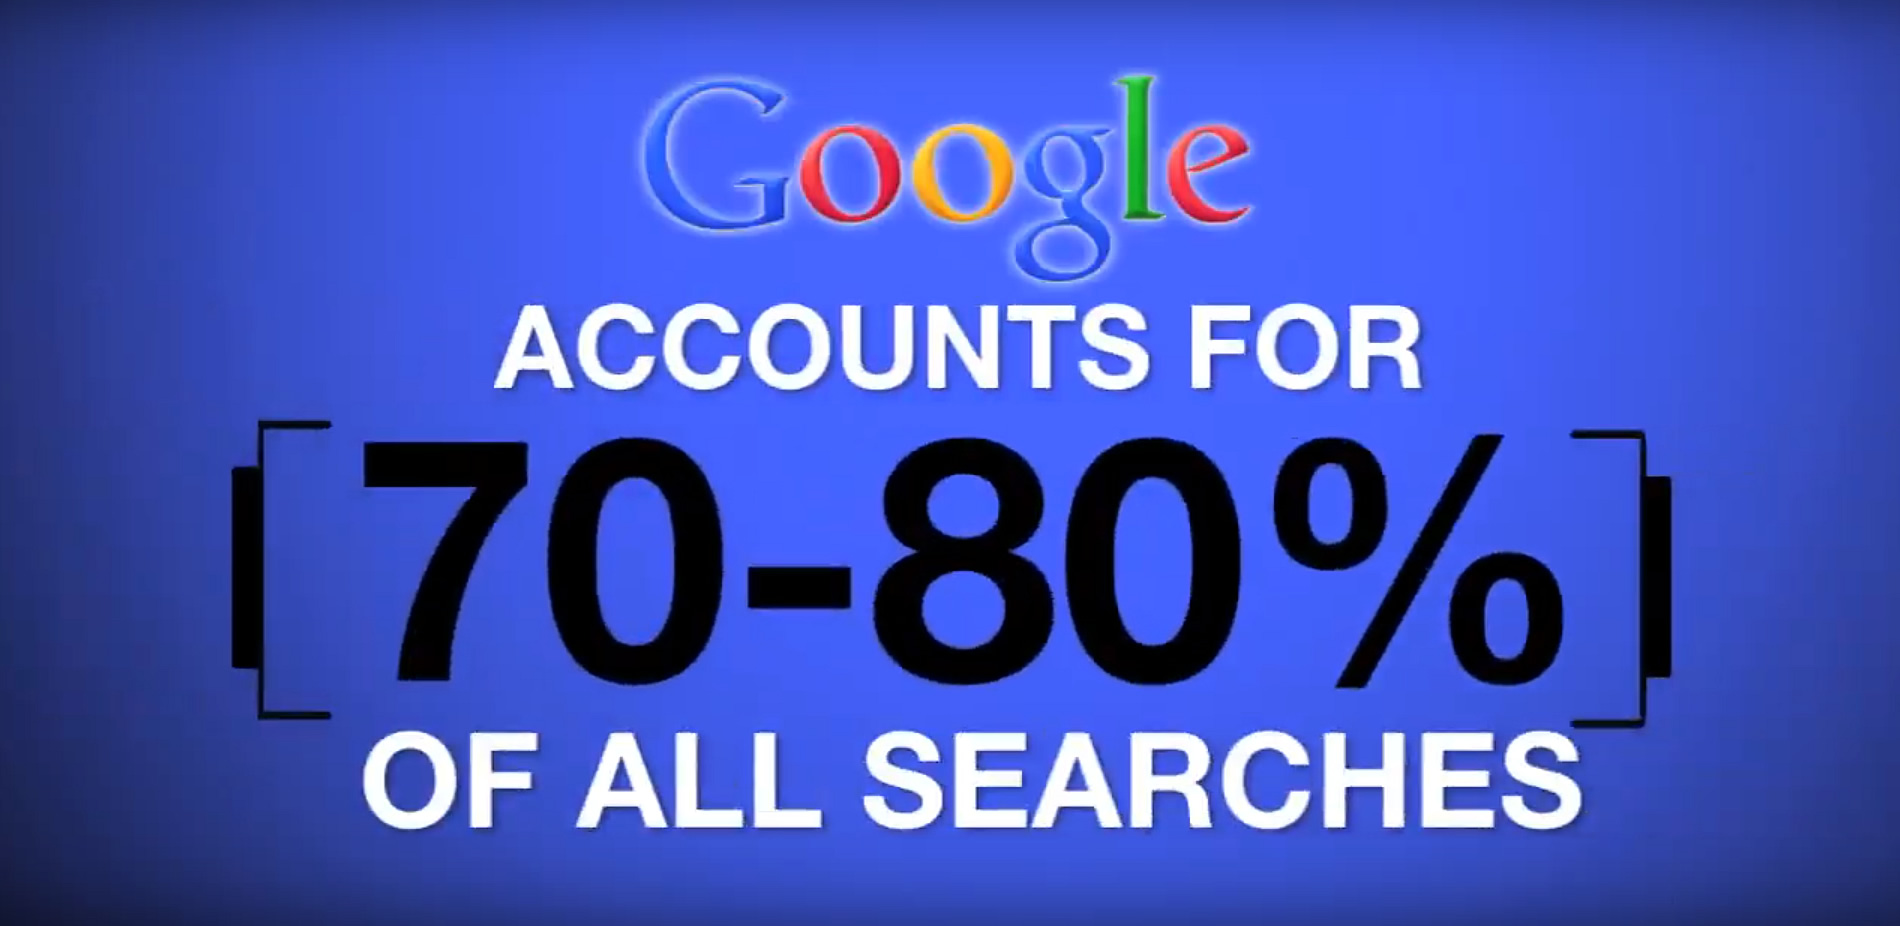 Google accounts for 70-80 percent of all searches